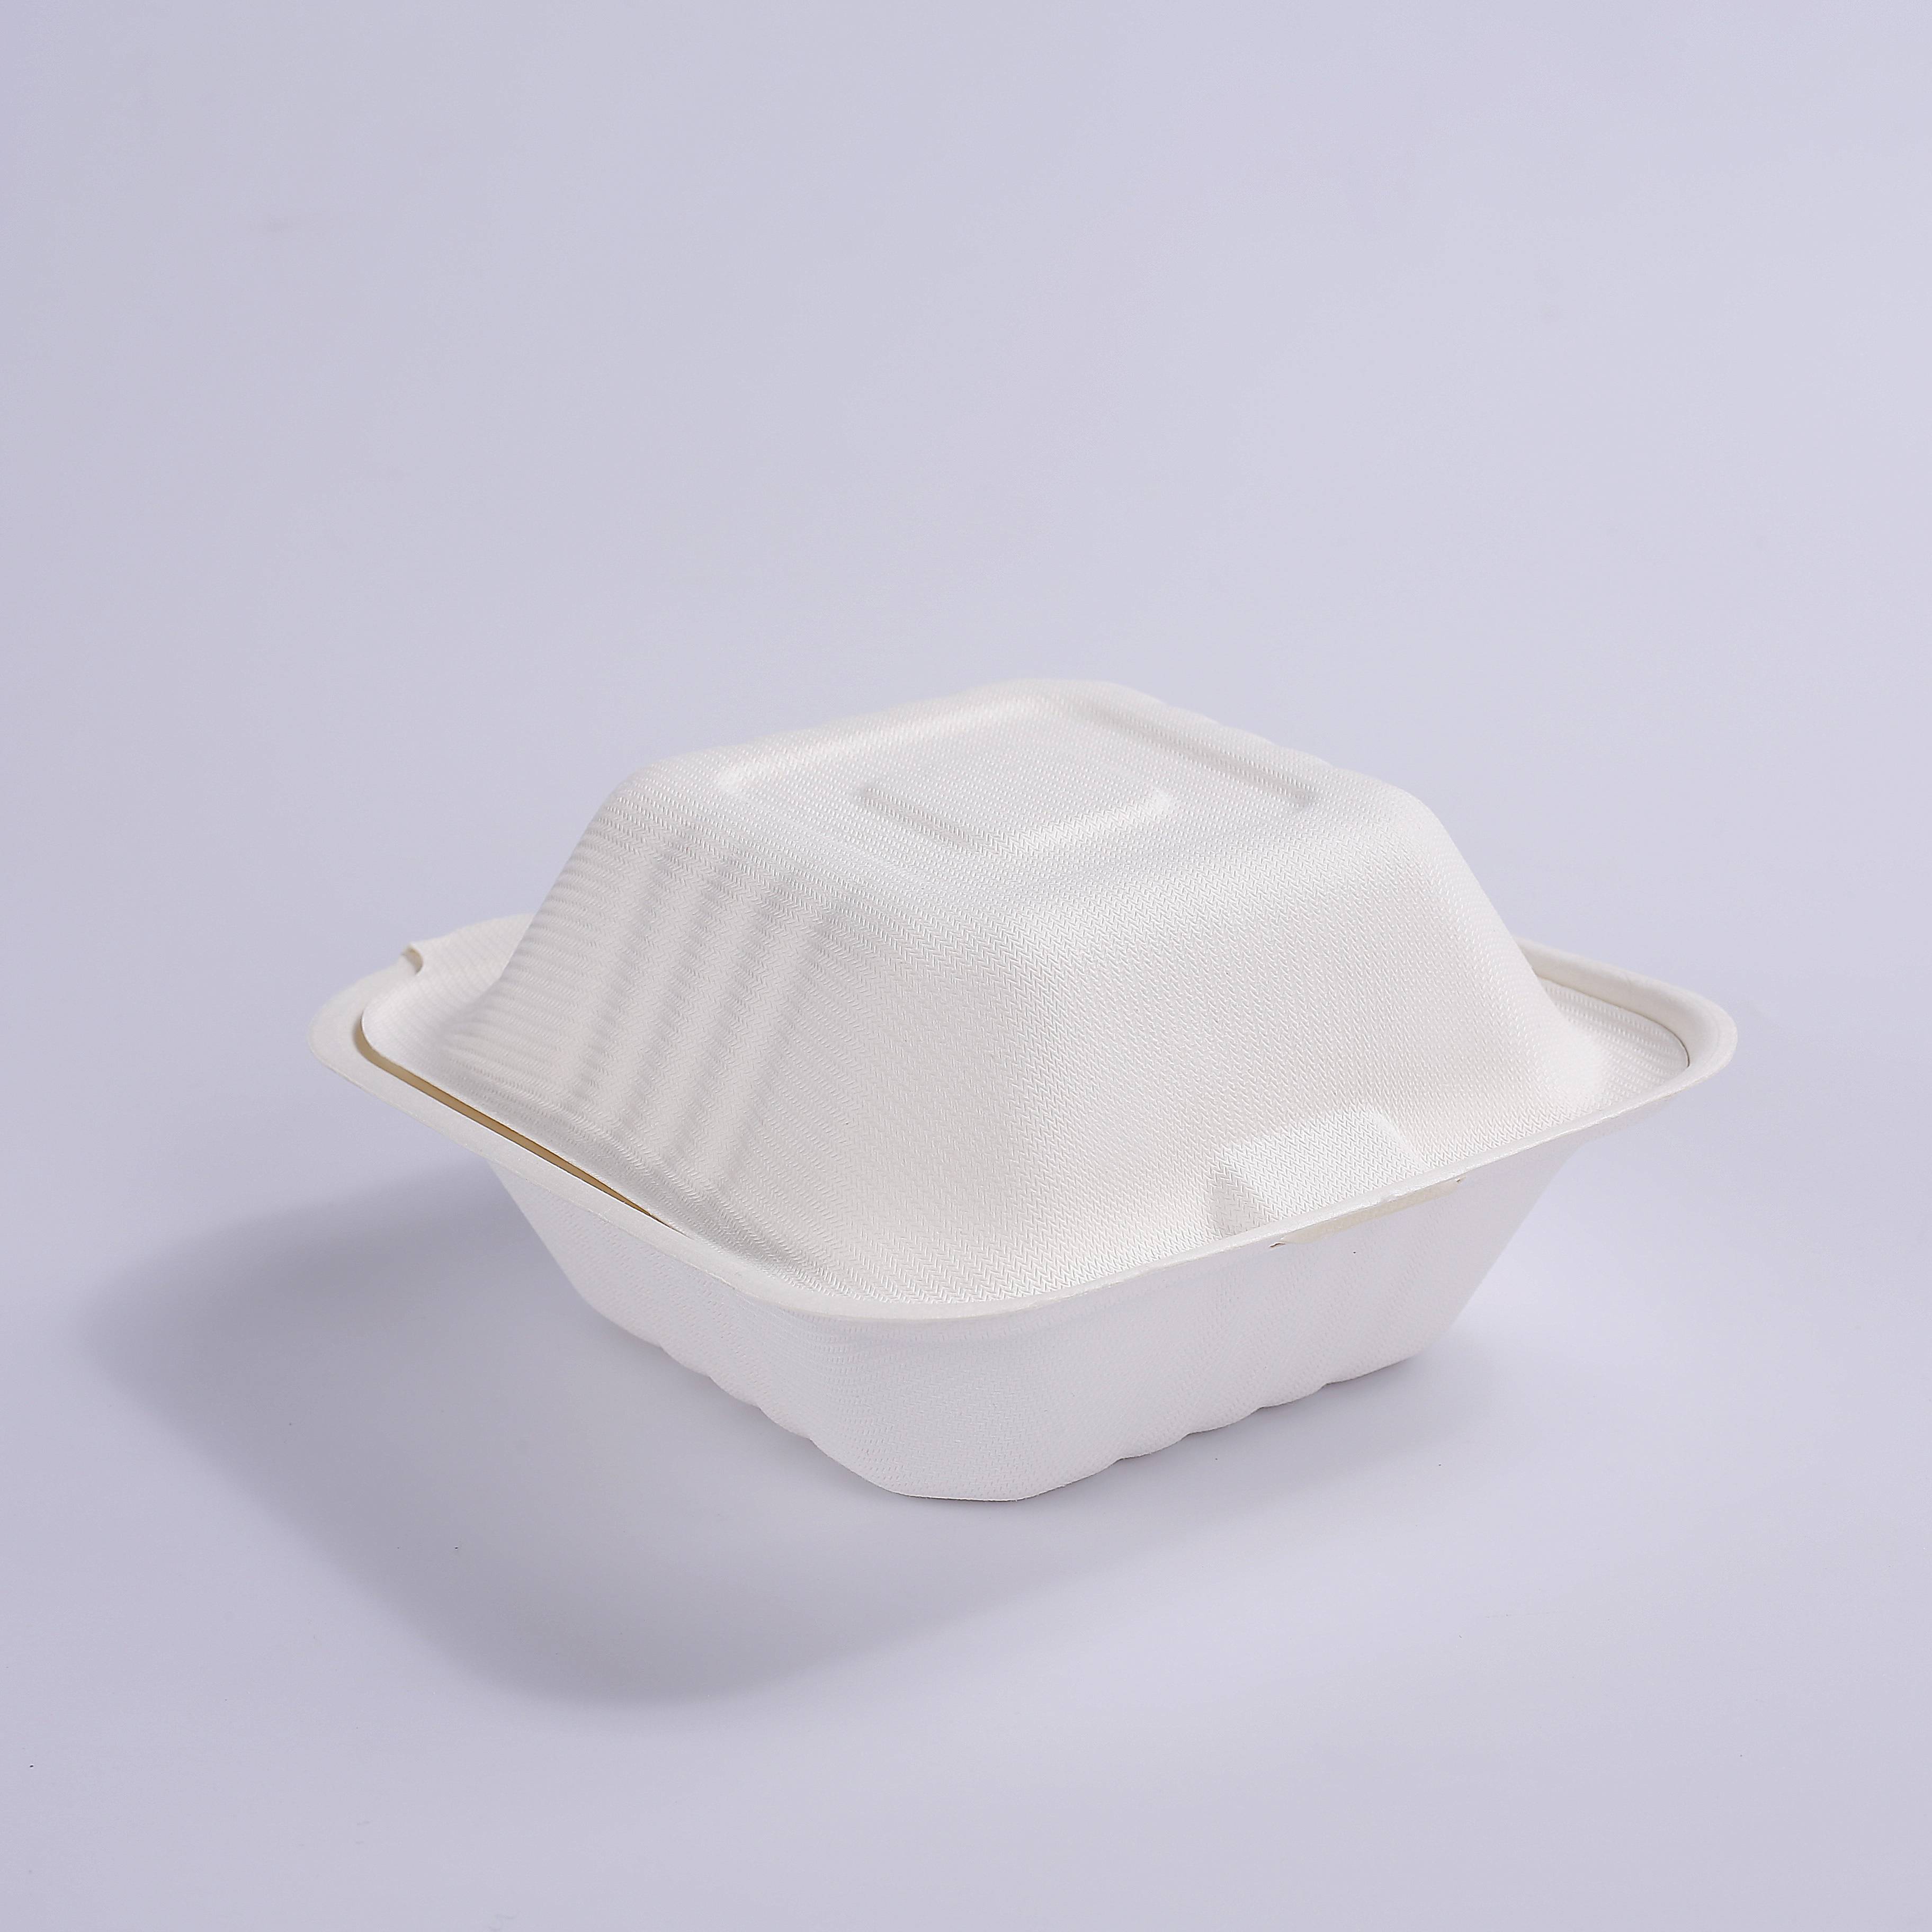 Popular Design for Bagasse Clamshell - Bagasse 6*6″ Clamshell Takeout Containers, Biodegradable Eco Friendly Take Out to Go Food Containers with Lids for Lunch Leftover Meal Prep Storage, Mi...